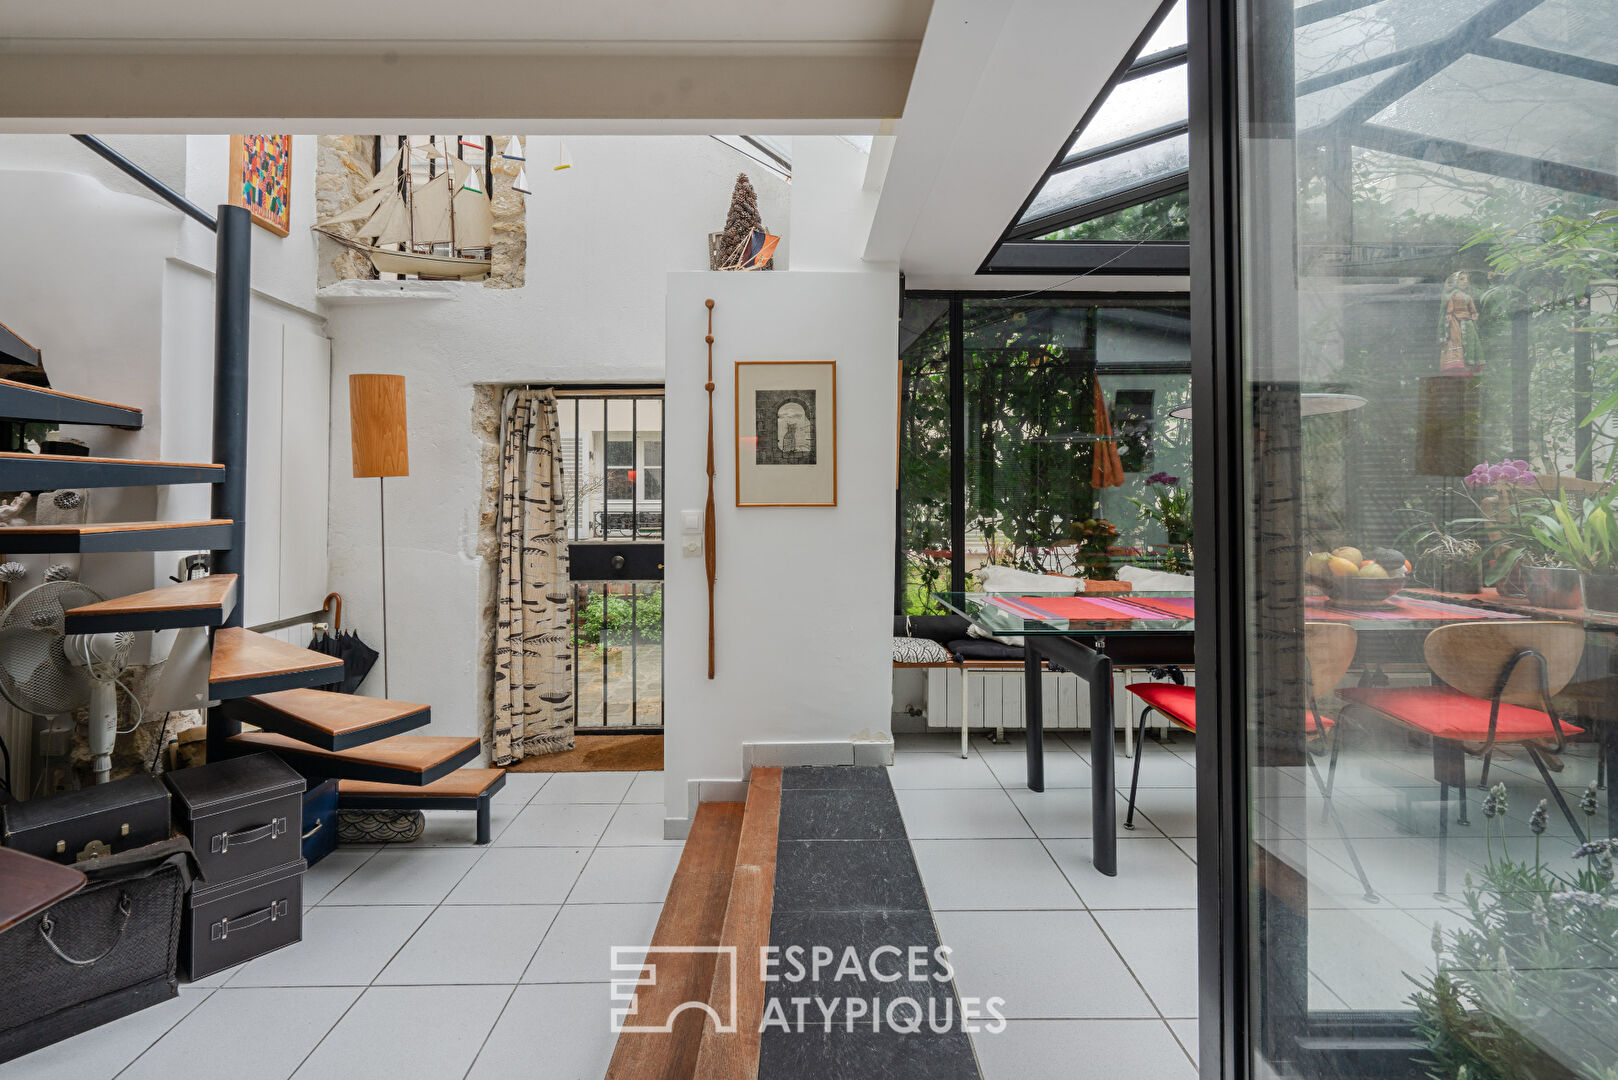 Croulebarbe district, house with glass roof, patio and terrace at Gobelins metro